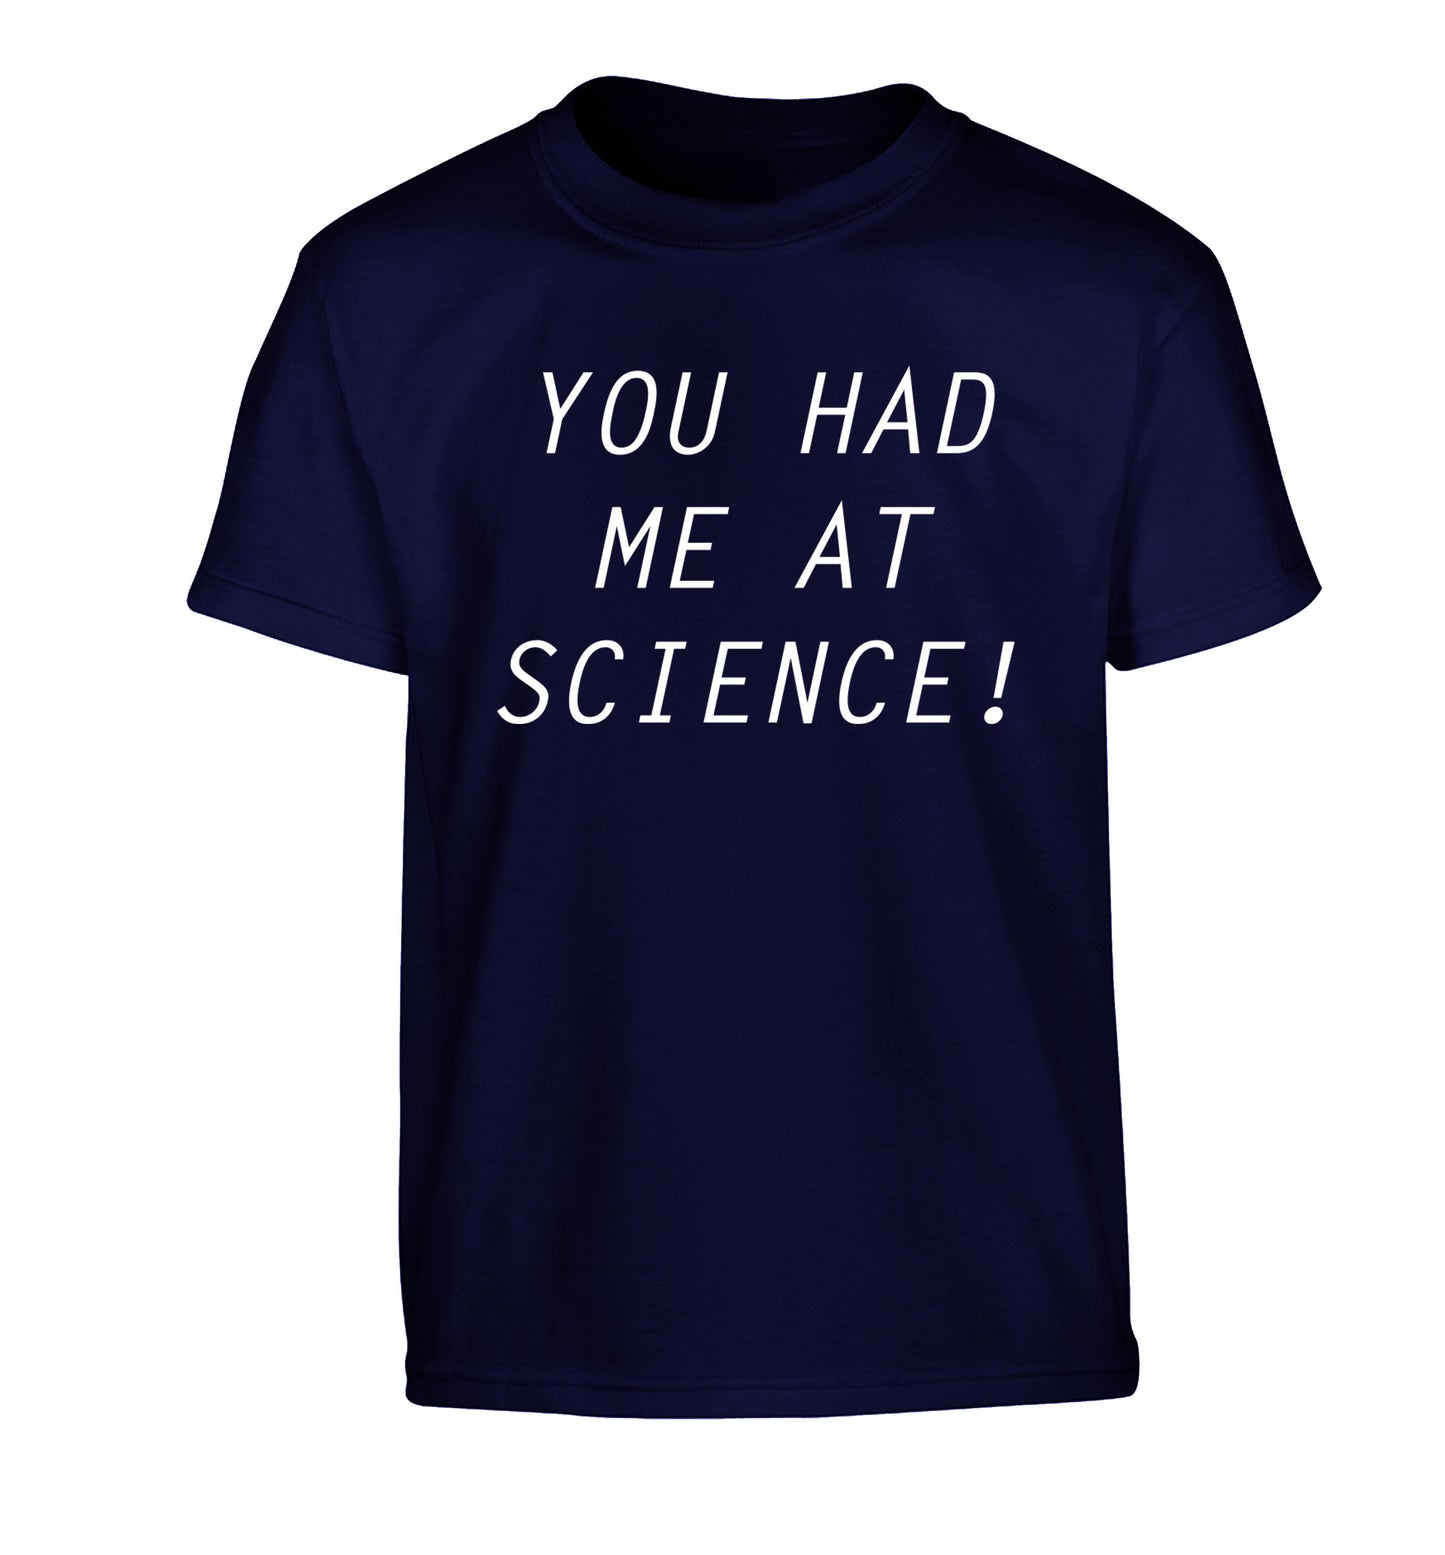 You had me at science Children's navy Tshirt 12-14 Years